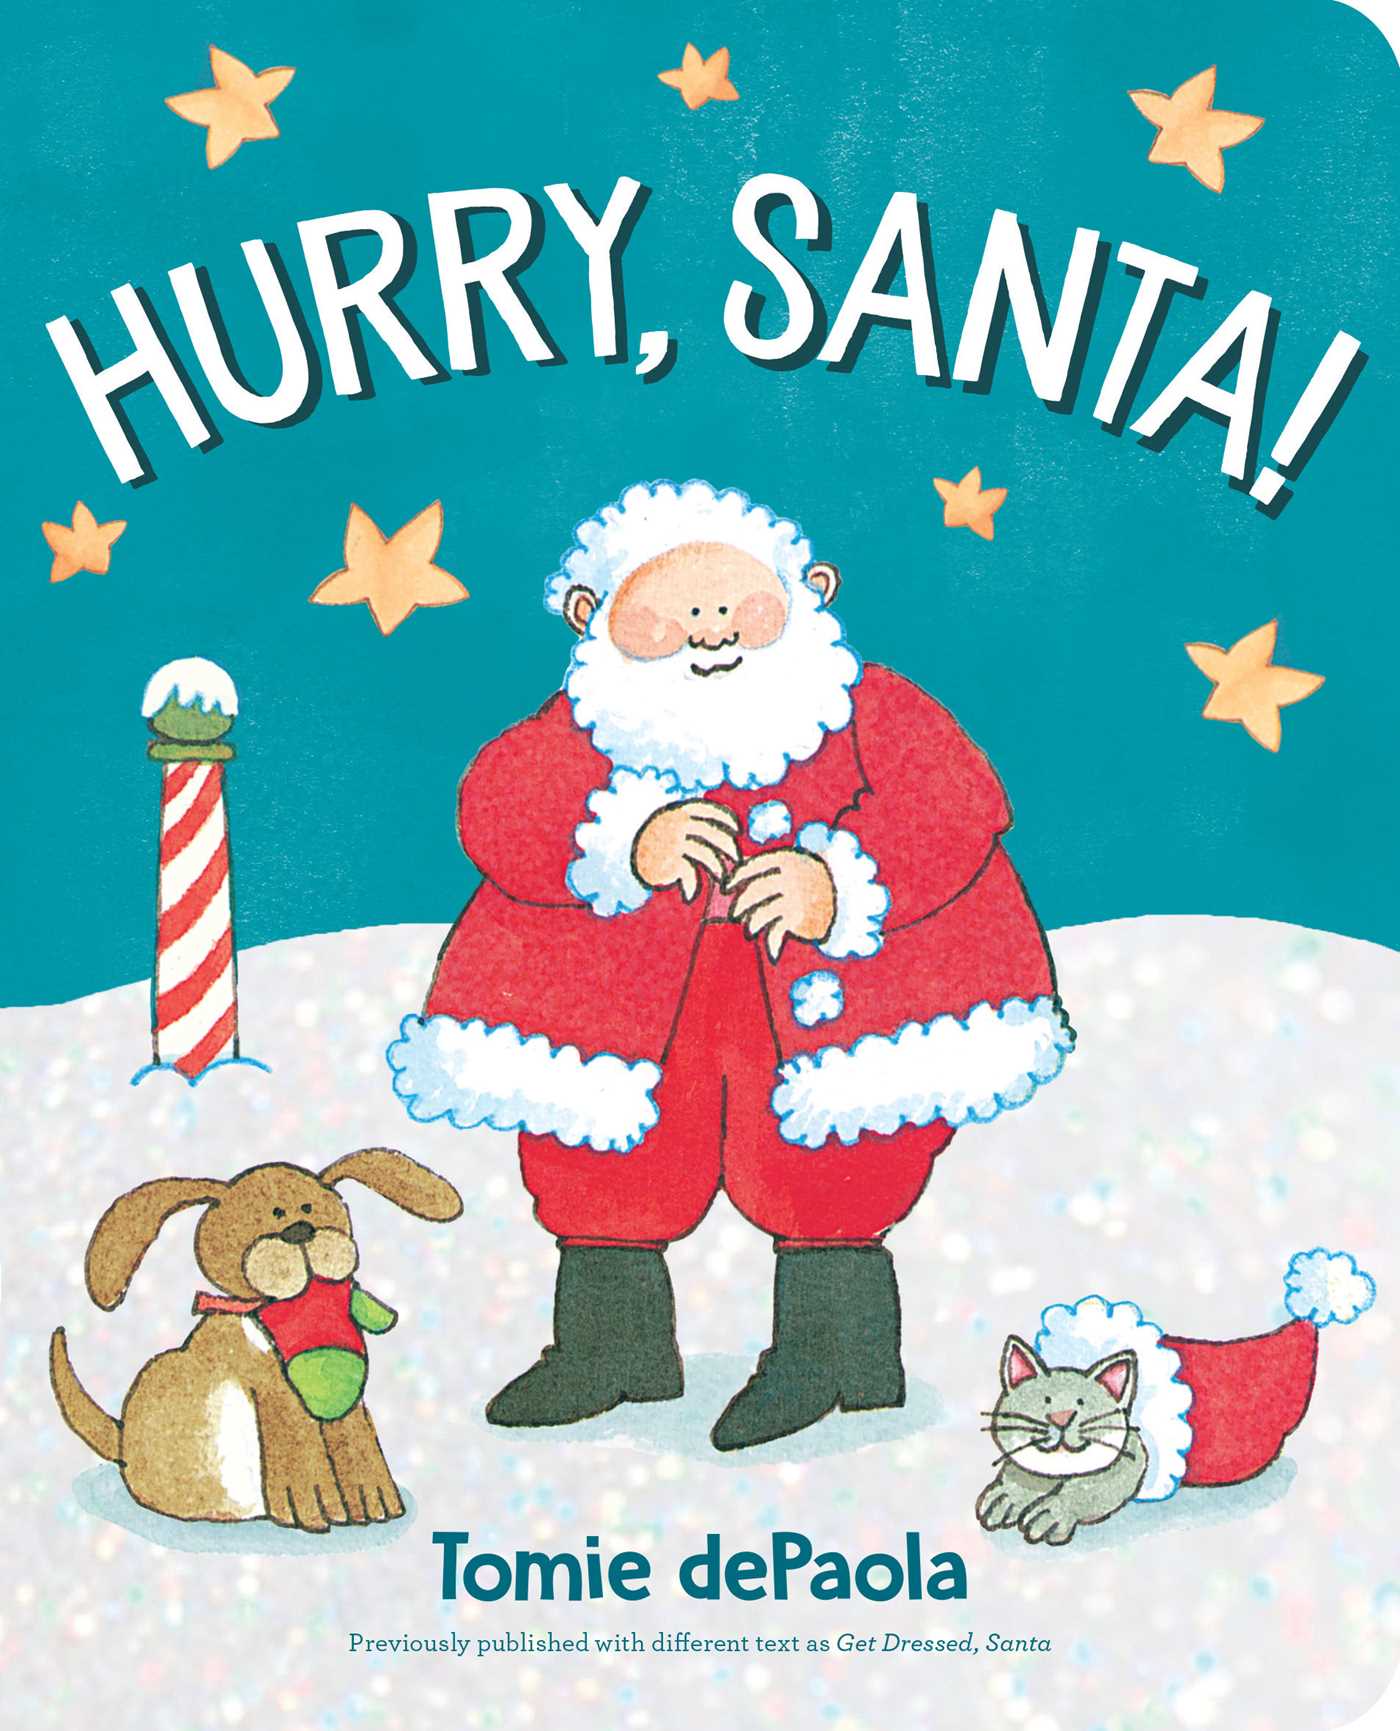 Hurry, Santa! by Tomie dePaola